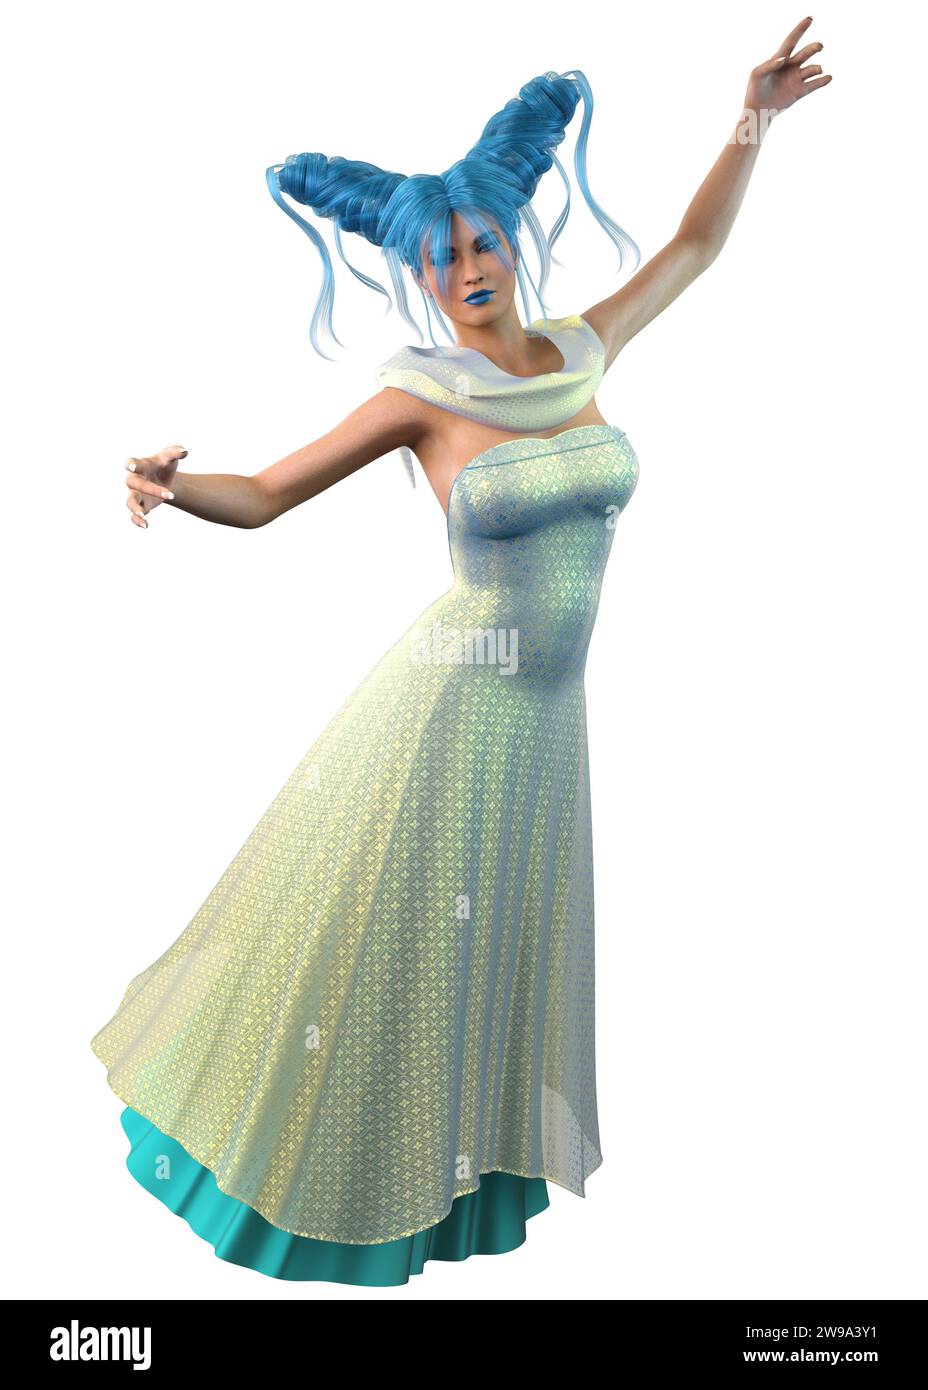 Fantasy mage, wizard woman with blue hair wears shining blue gown, 3D Illustration. Stock Photo